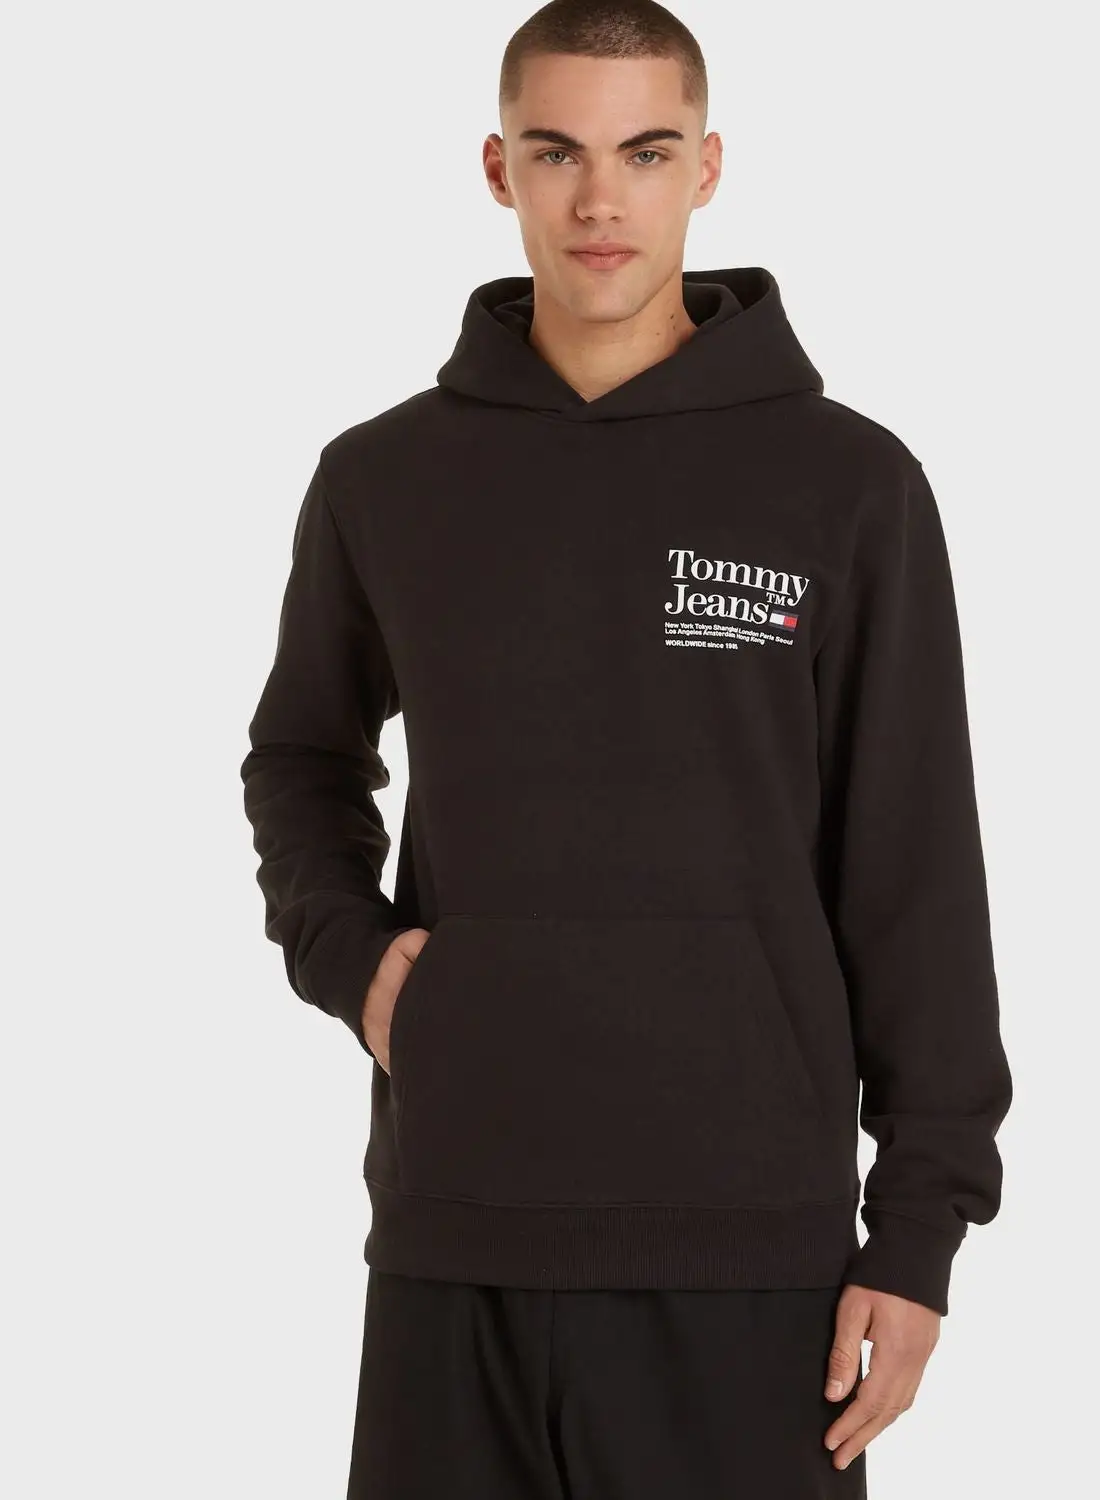 TOMMY JEANS Text Print Modern Hoodie